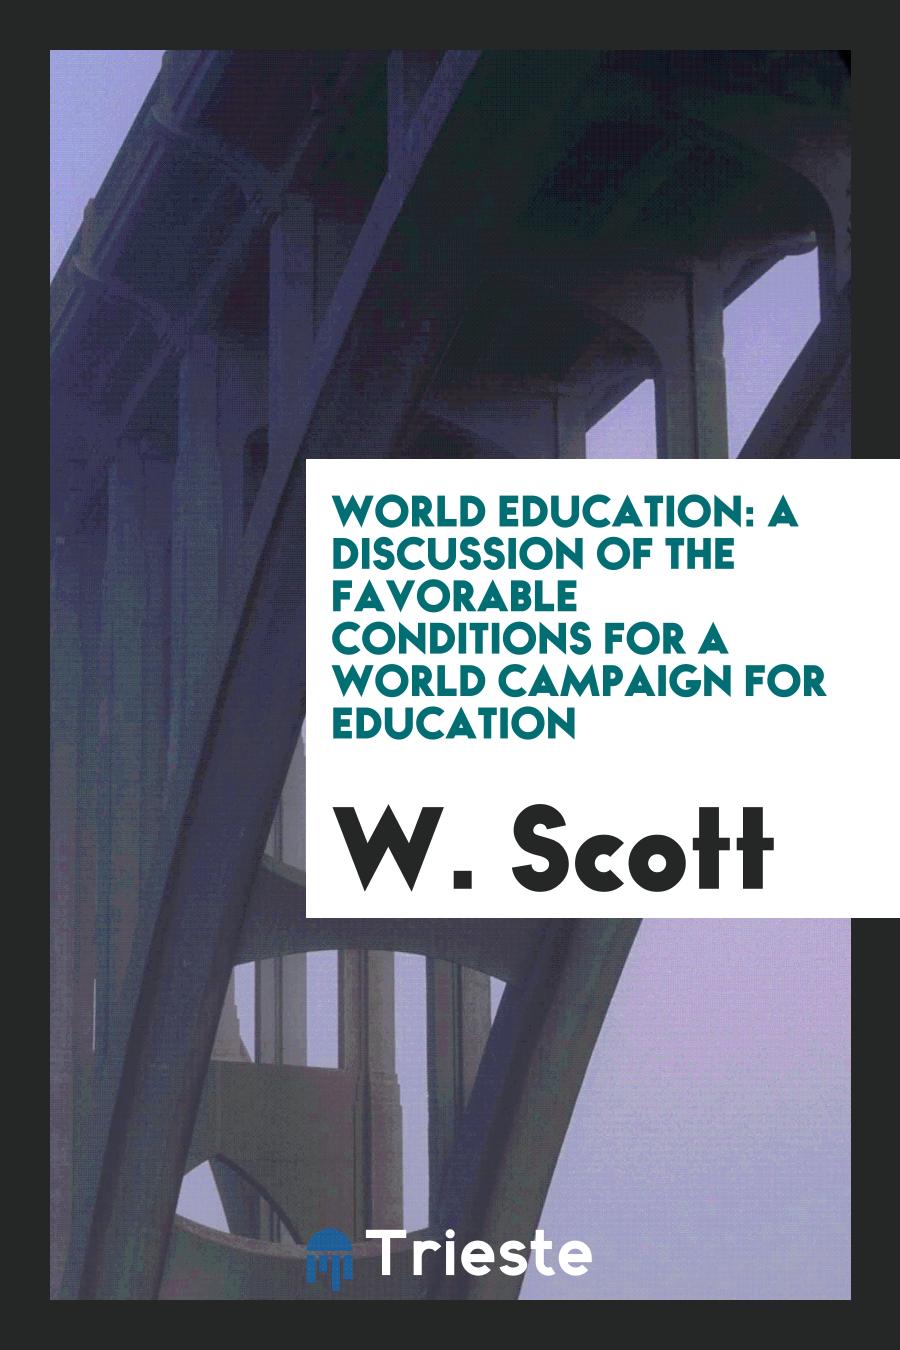 World Education: A Discussion of the Favorable Conditions for a World Campaign for Education